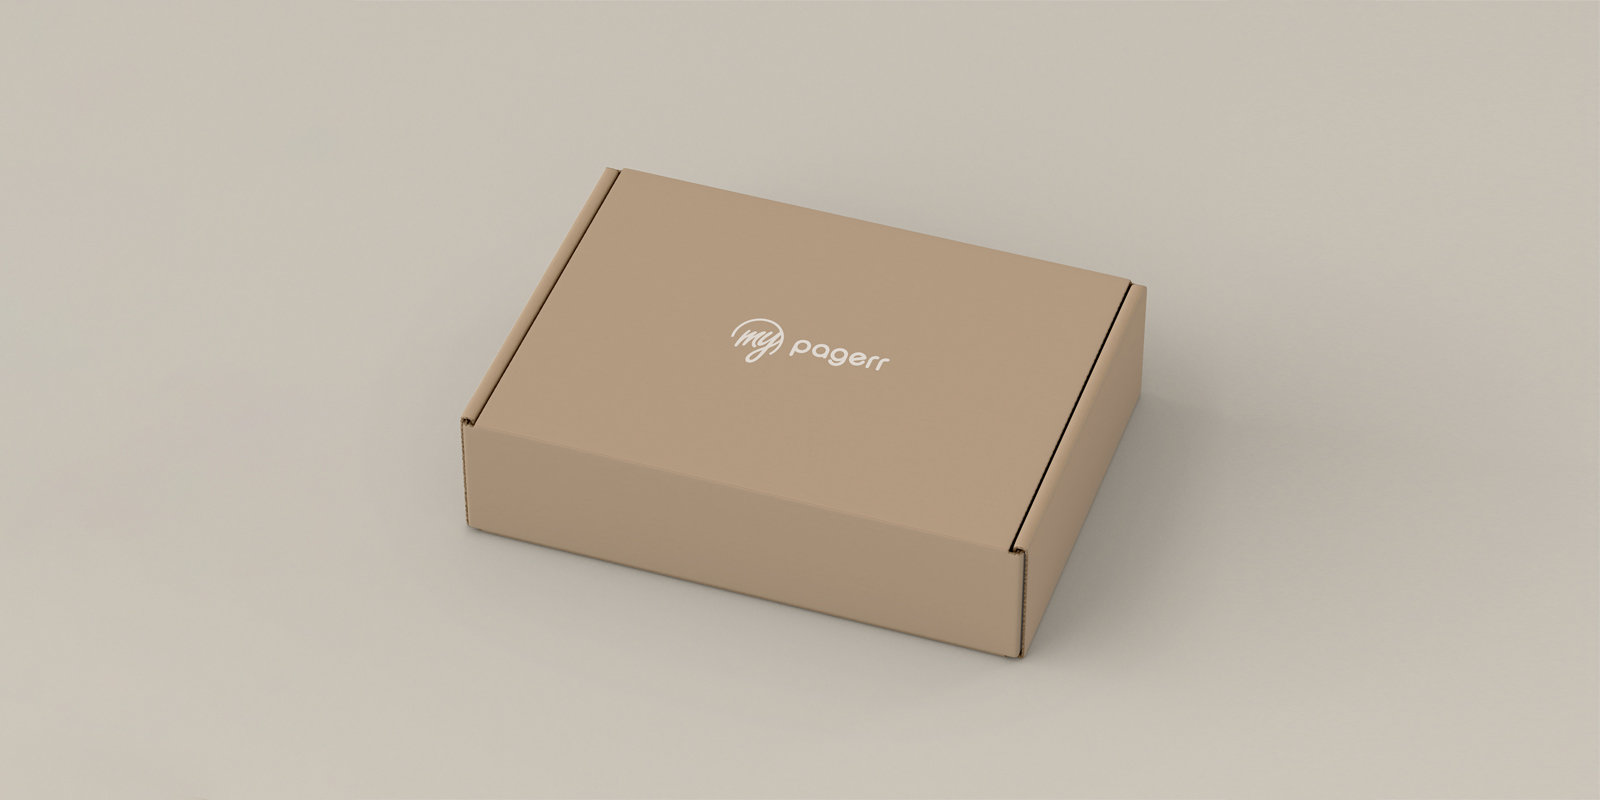 Bespoke boxes in Brisbane - Print with Pagerr